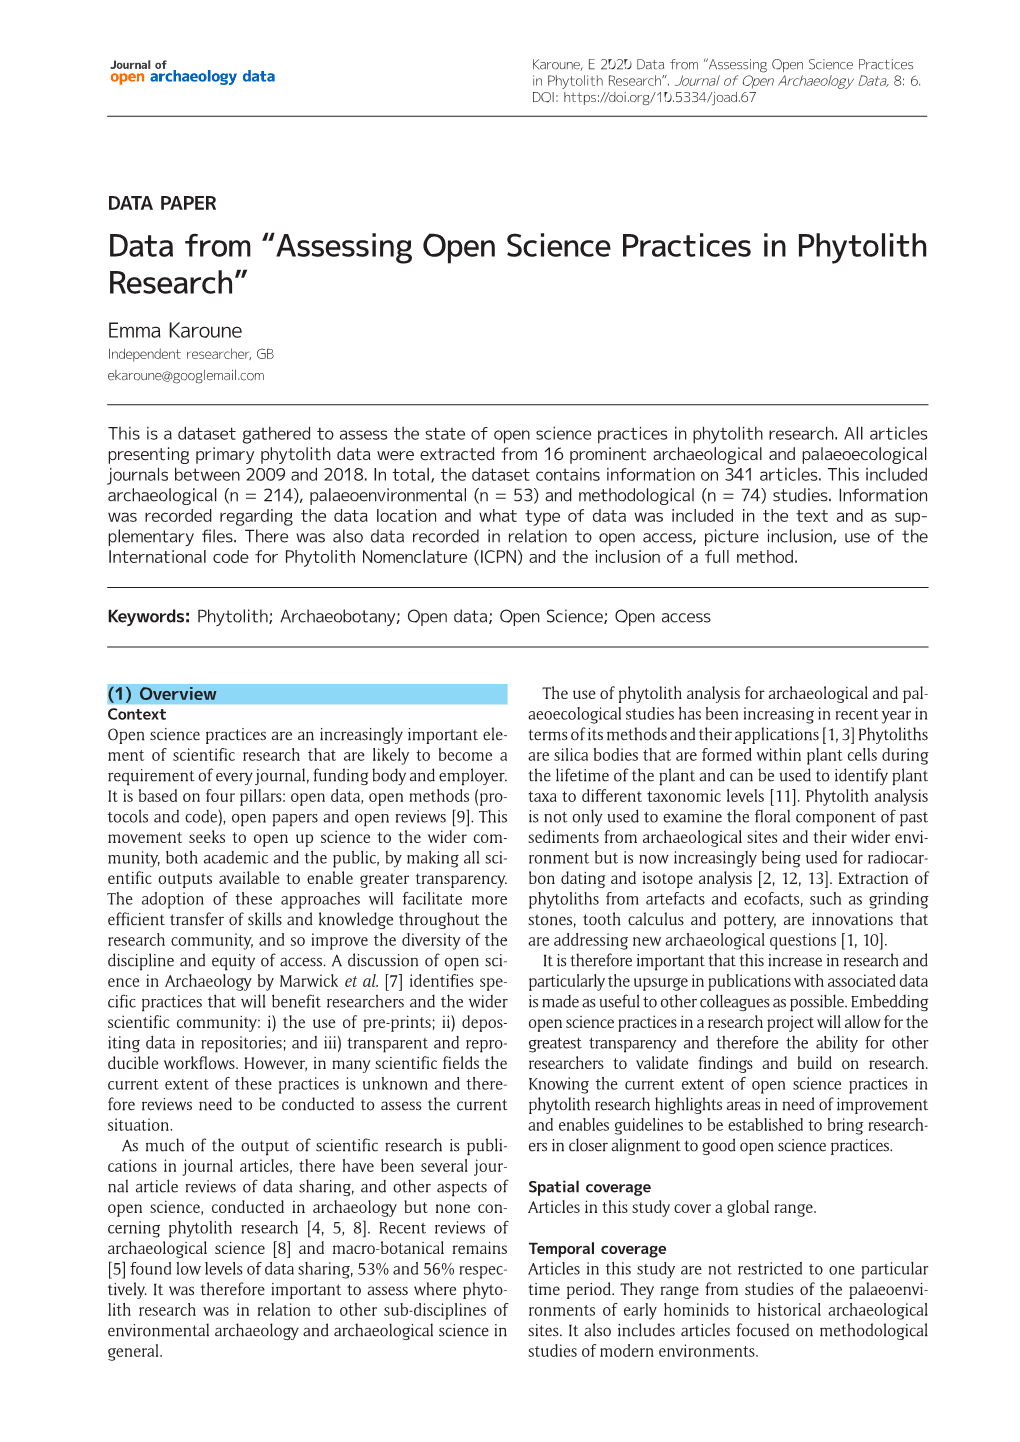 Data from “Assessing Open Science Practices in Phytolith Research”